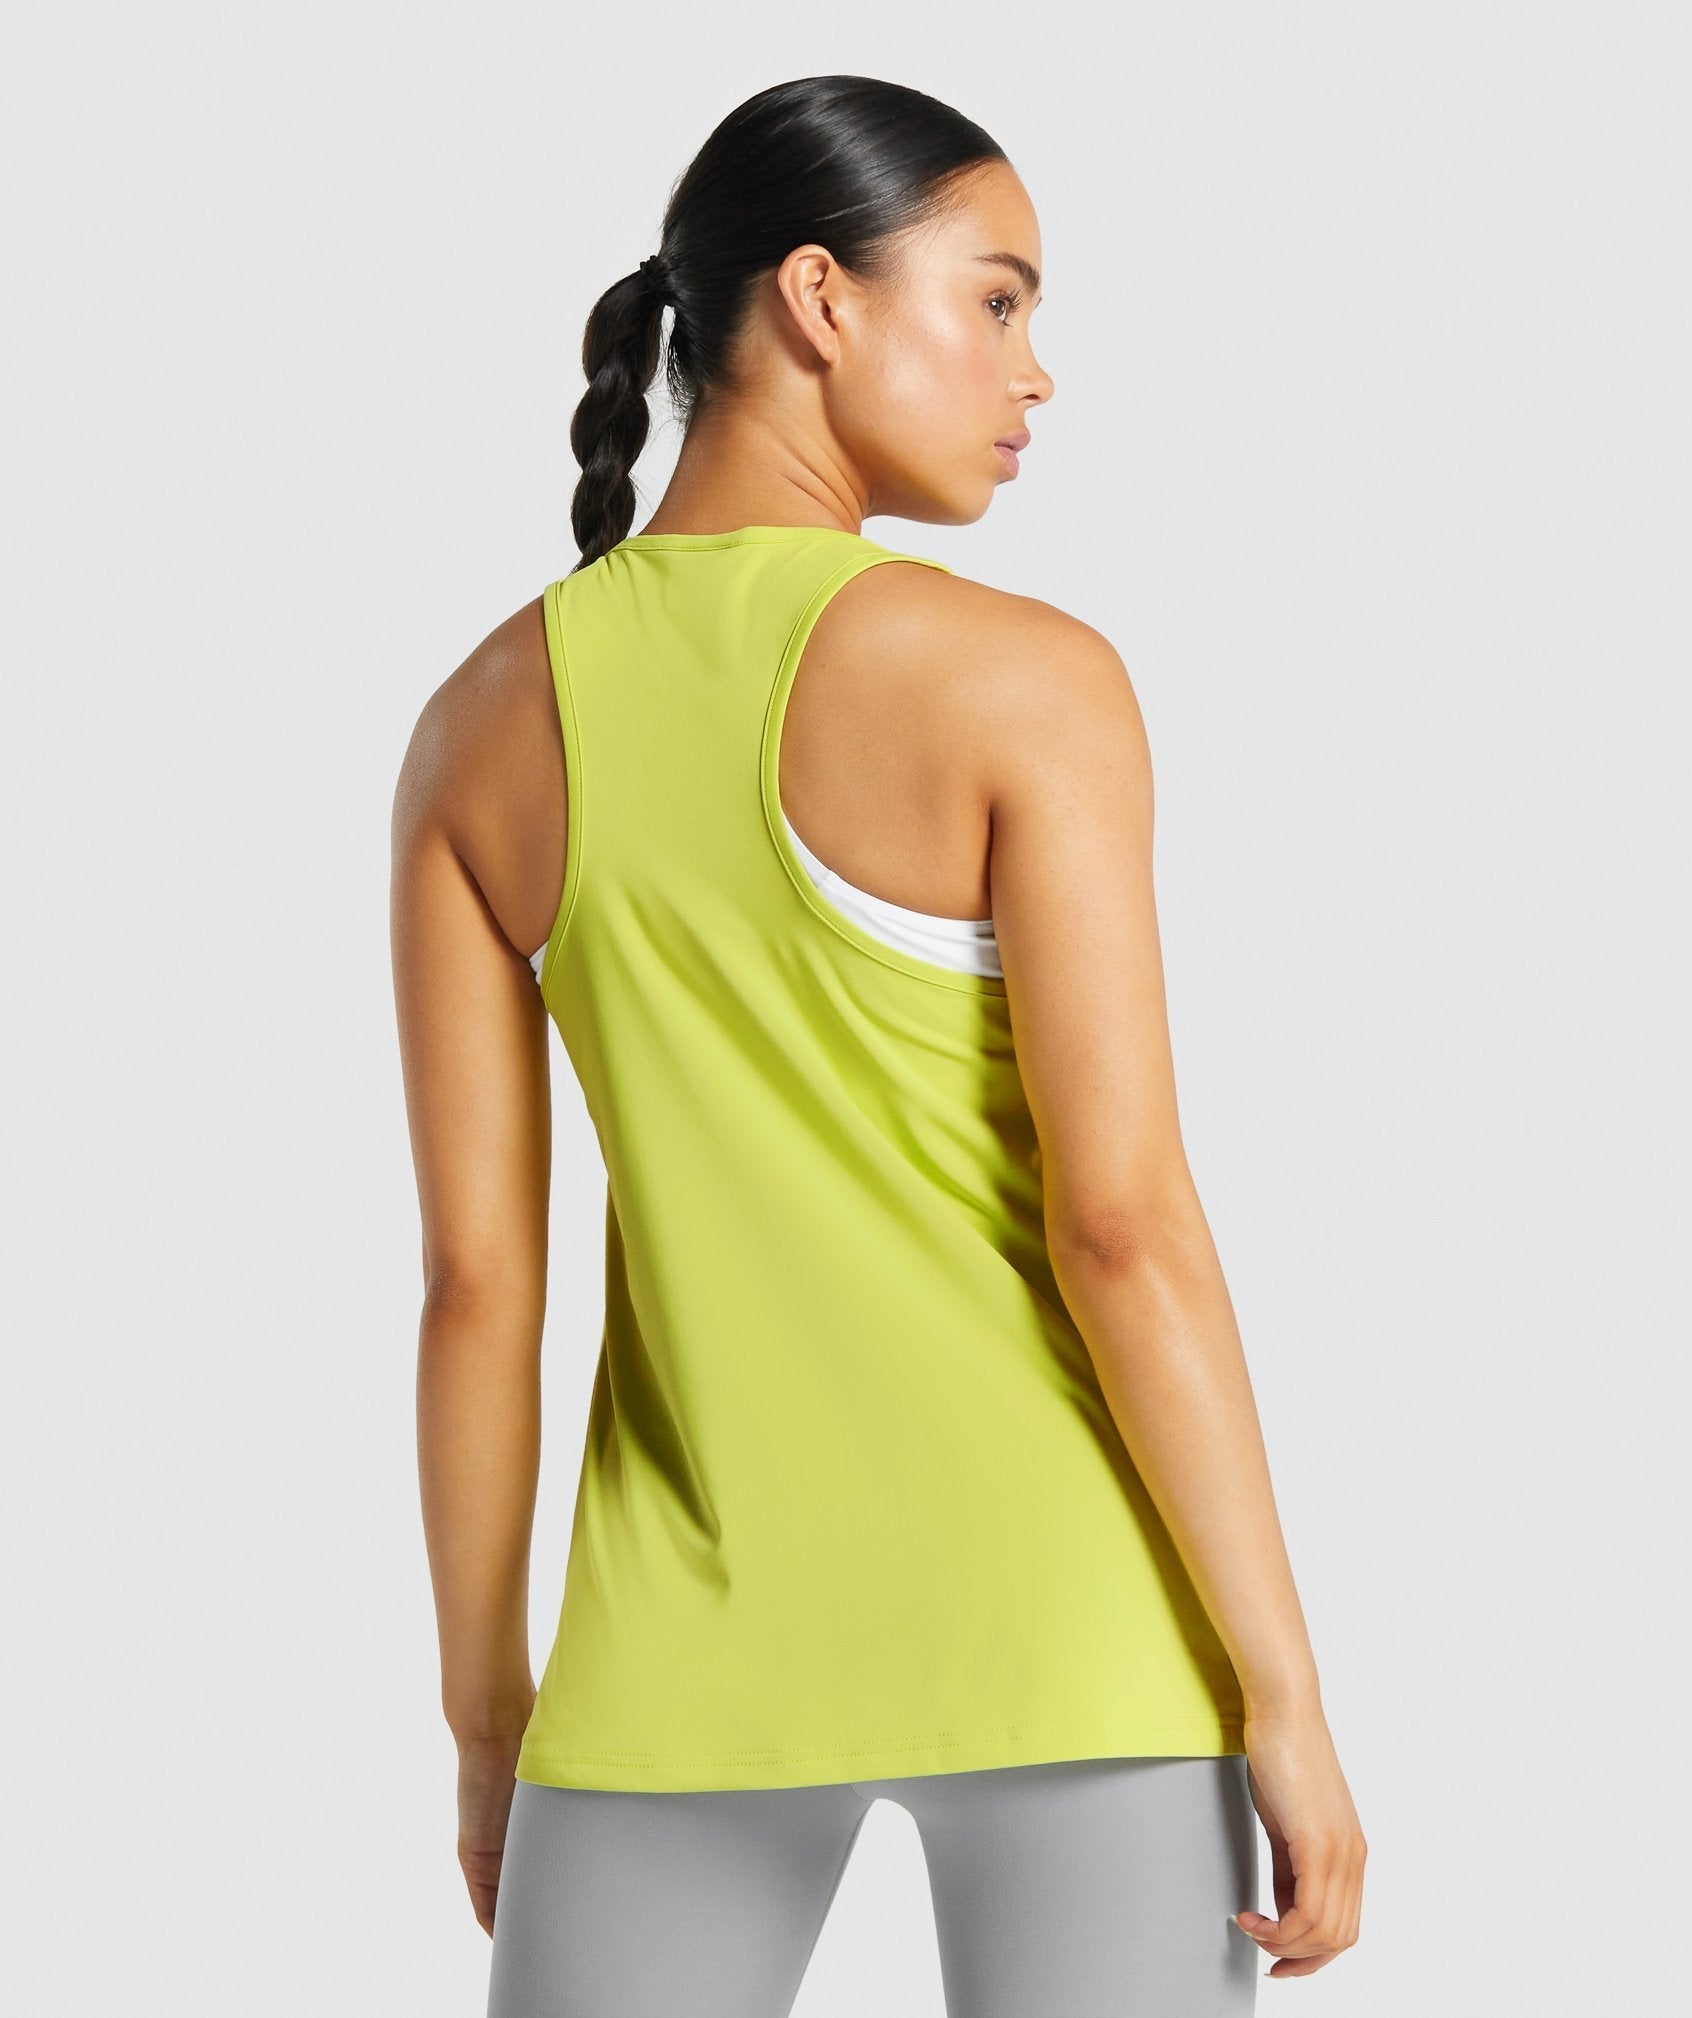 Training Vest in Yellow - view 2